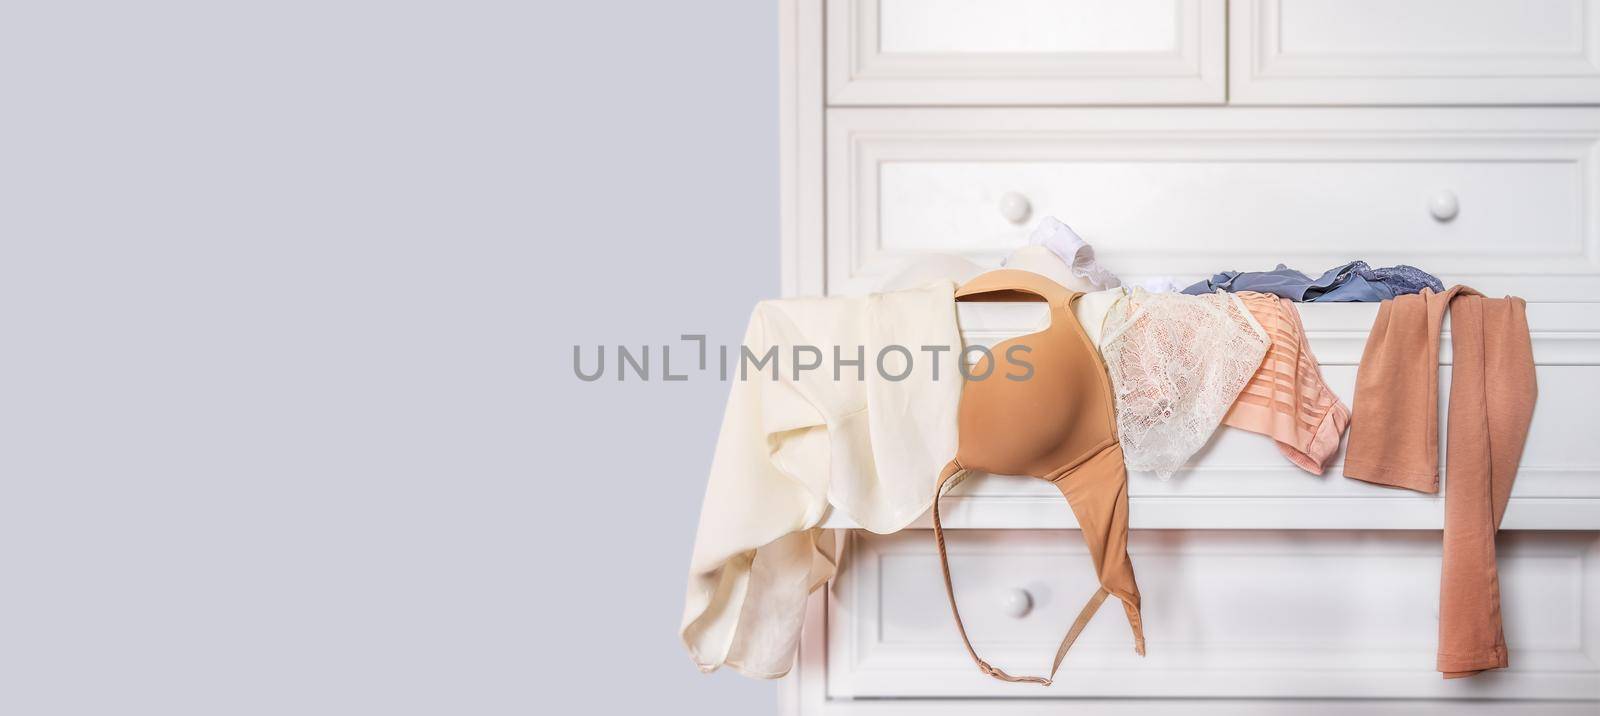 banner with women's underwear close-up on a white background by Ramanouskaya